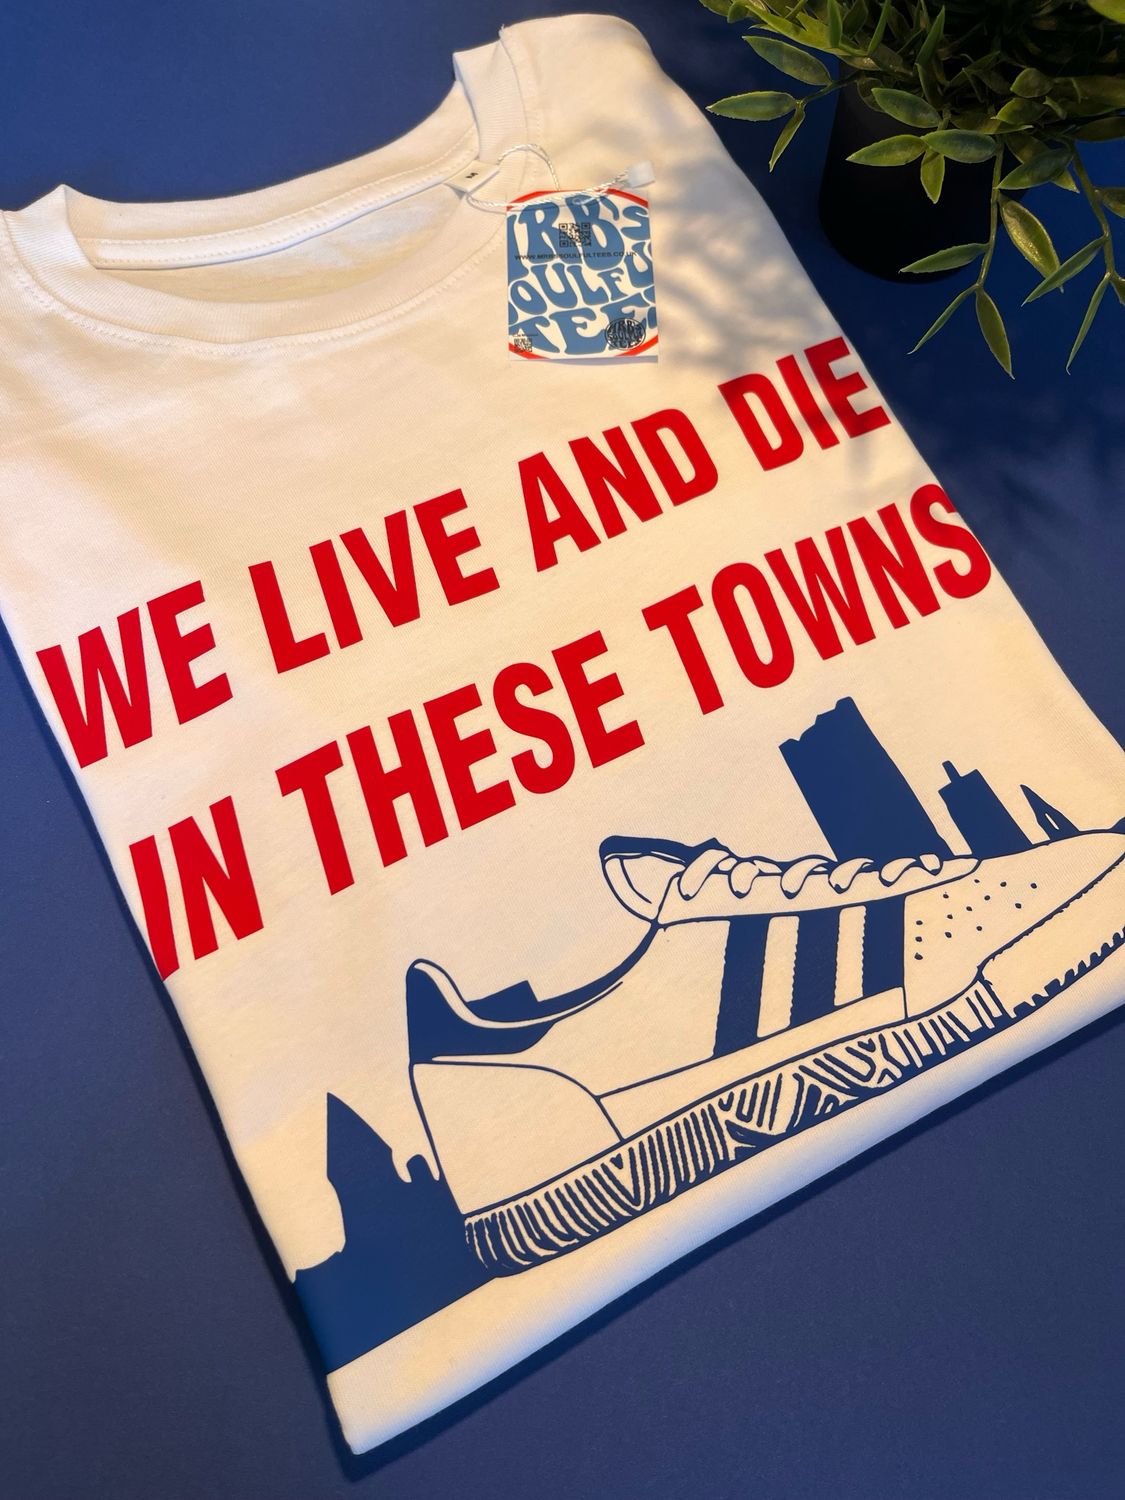 LIVE AND DIE IN THESE TOWNS ORGANIC COTTON T SHIRT